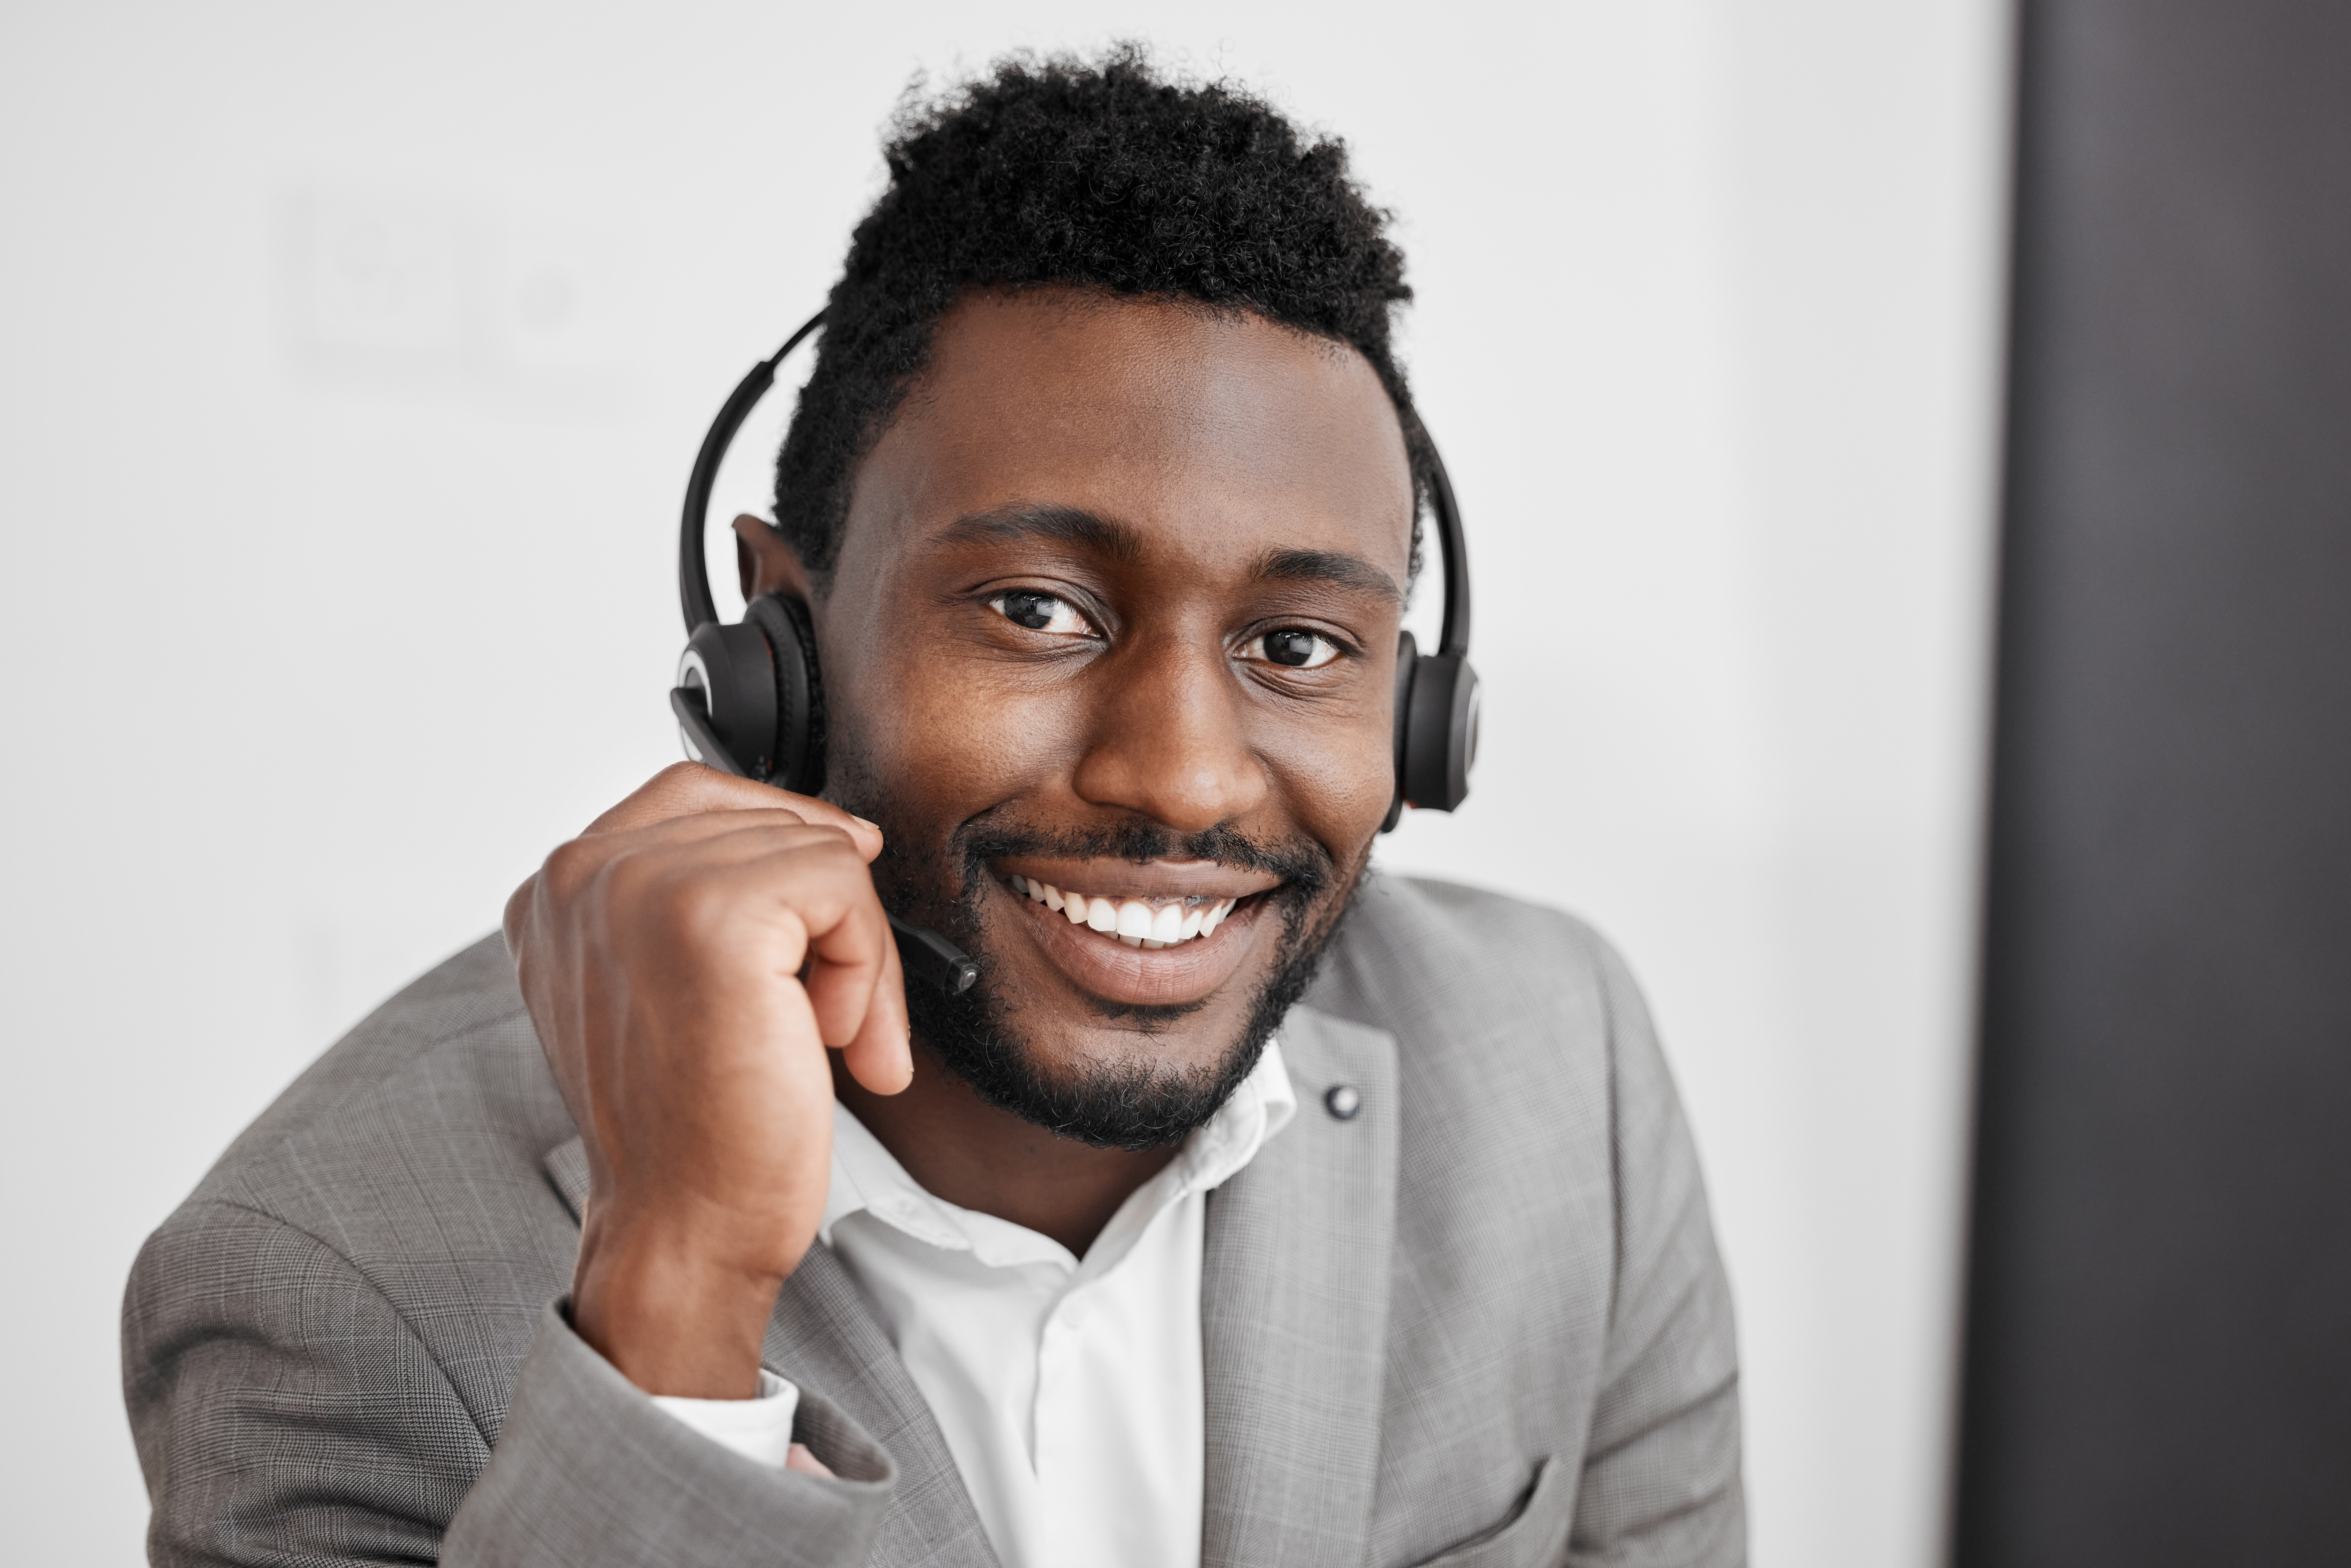 **SayPro SAQA Course 10358 - Mastering Contact Center Operations in a Commercial Environment